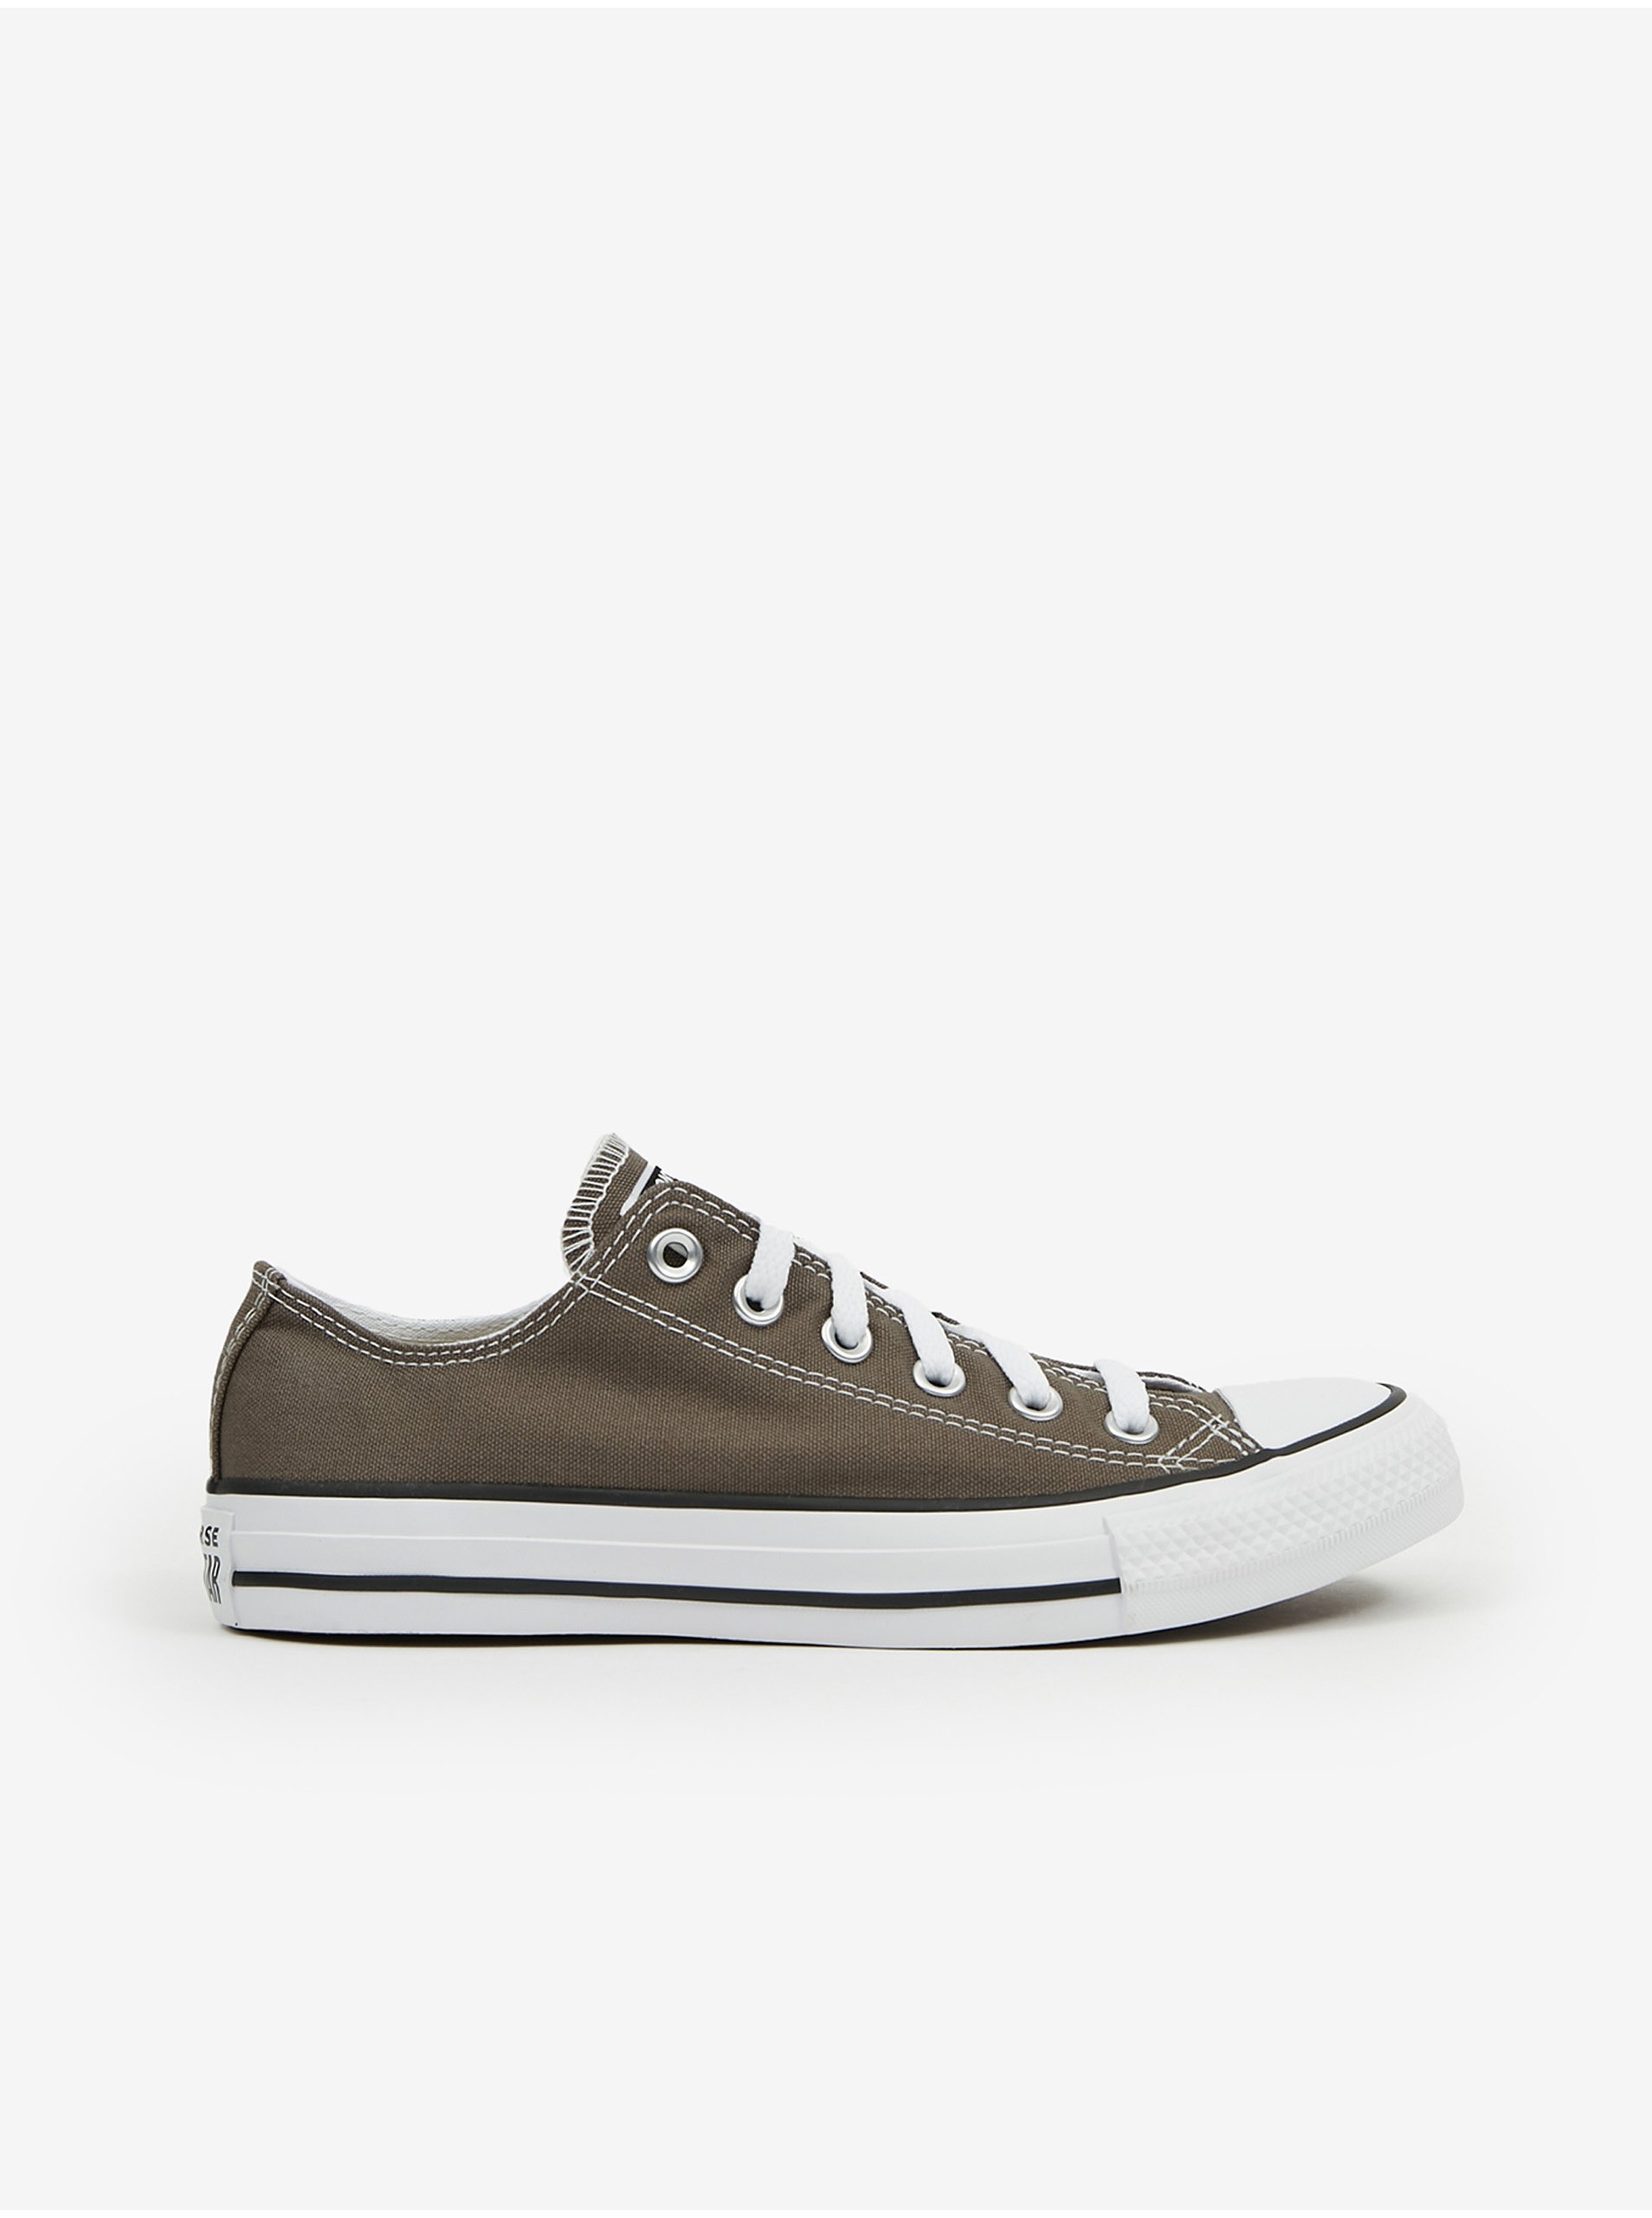 Brown Converse Chuck Taylor All Star Sneakers - Unisex